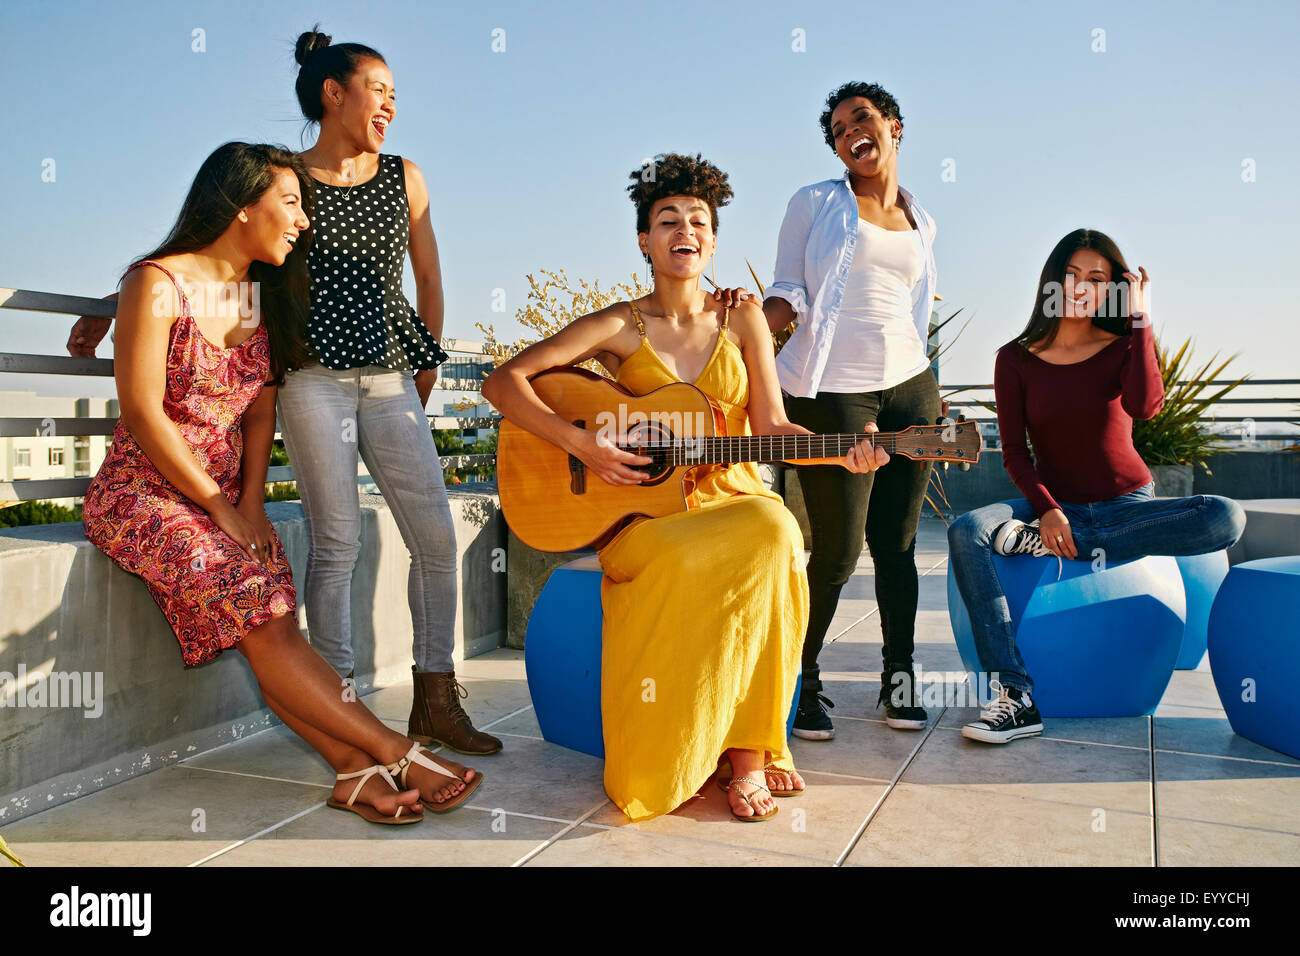 Women playing music and singing on urban rooftop Stock Photo